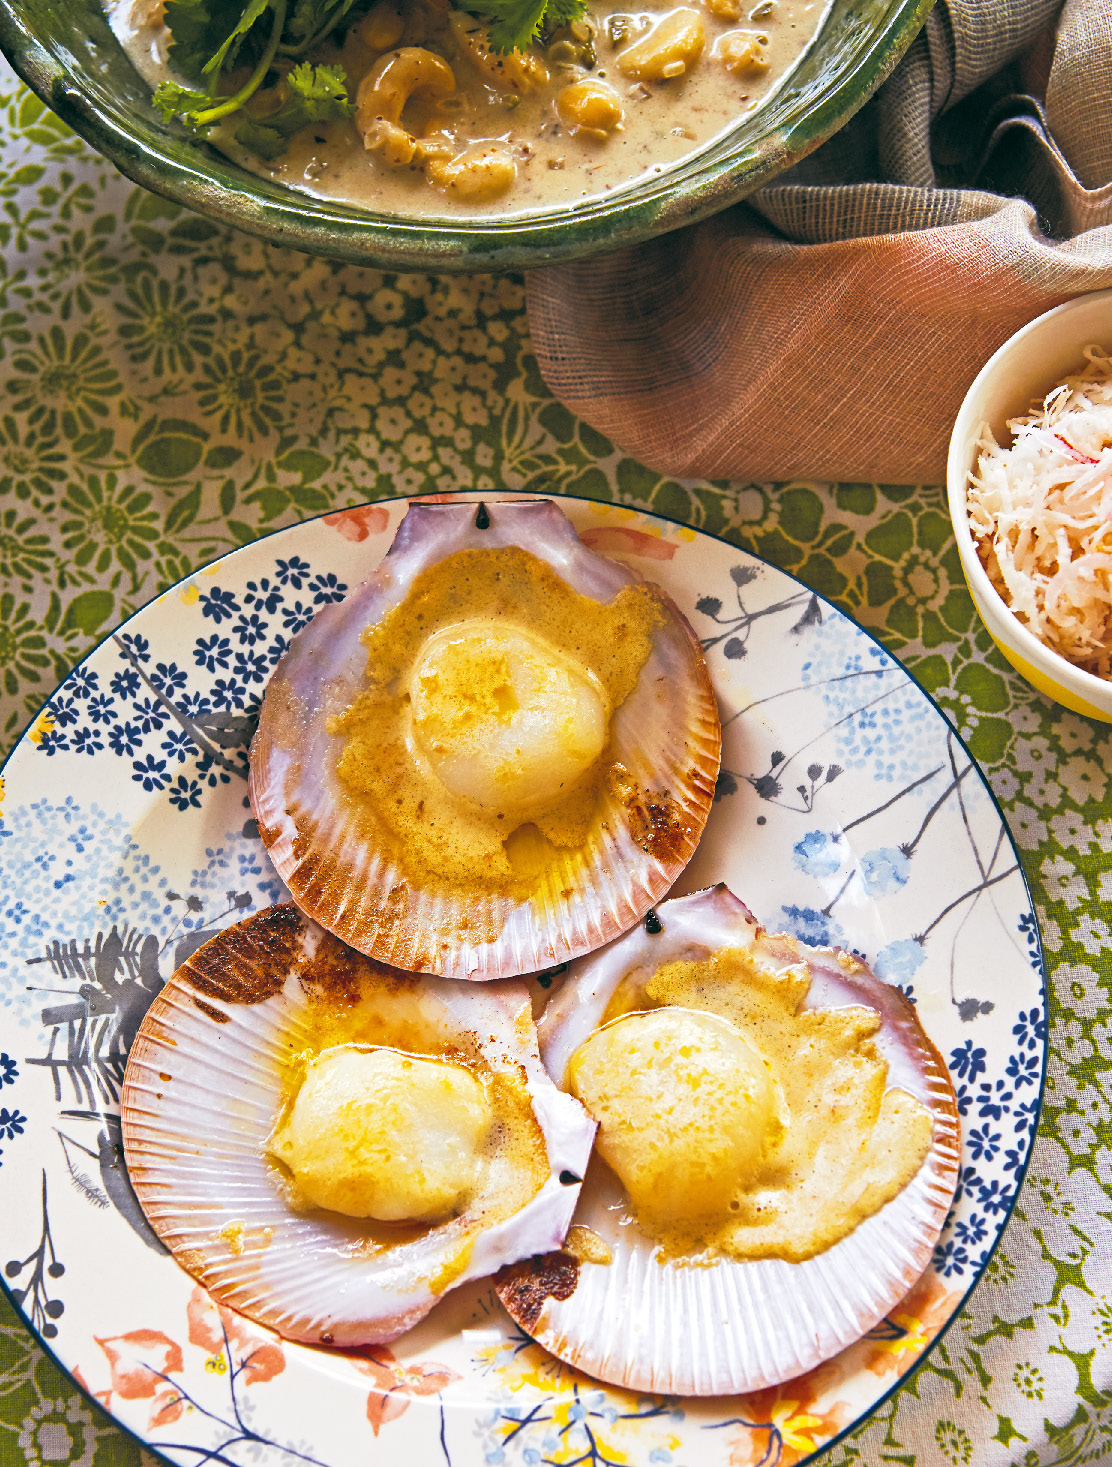 Scallops with miso butter